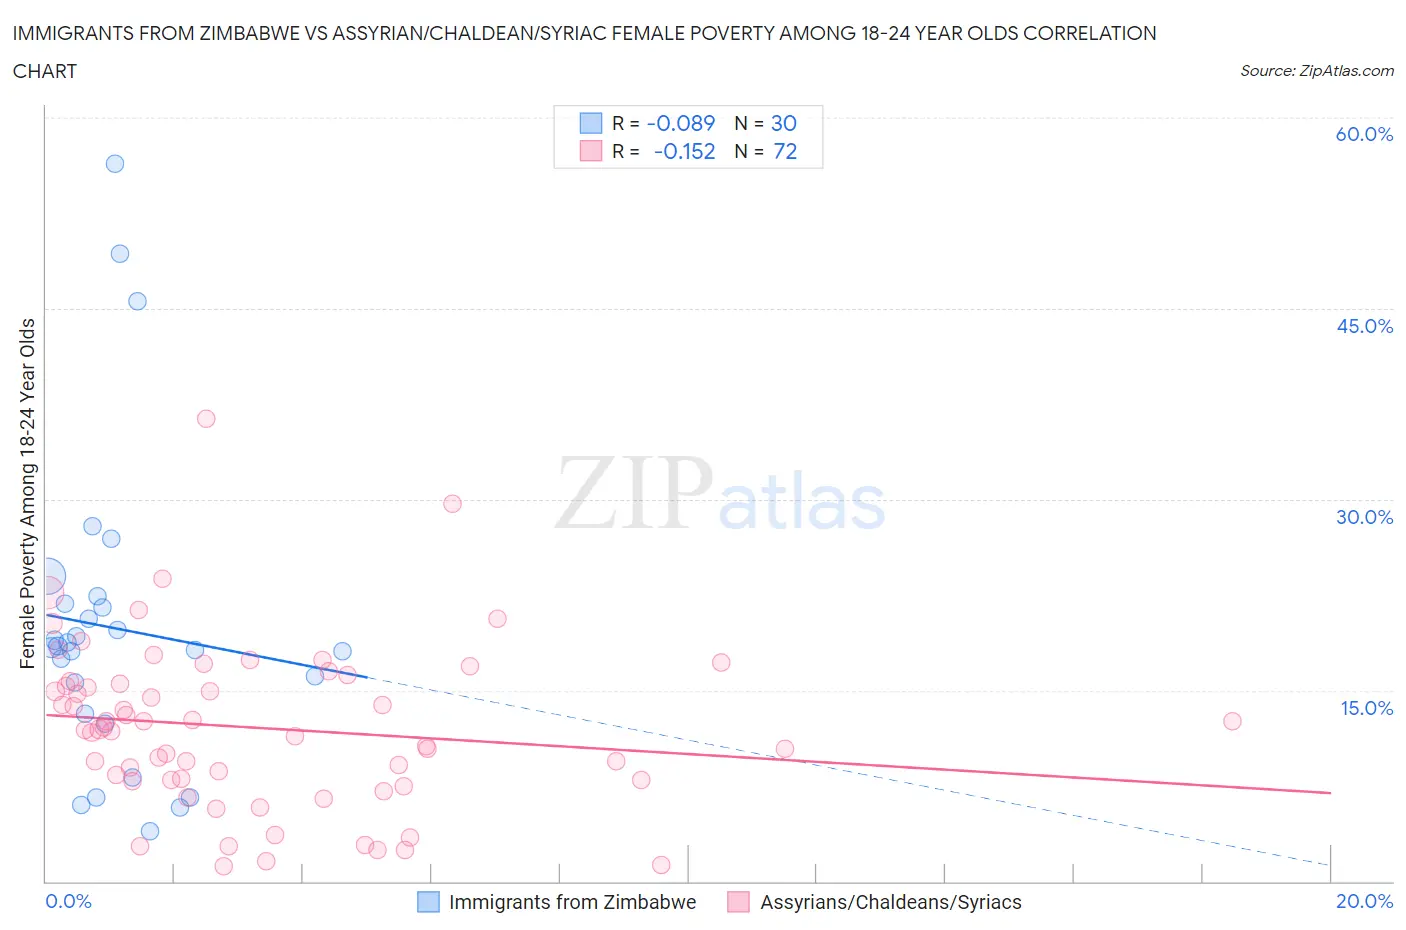 Immigrants from Zimbabwe vs Assyrian/Chaldean/Syriac Female Poverty Among 18-24 Year Olds